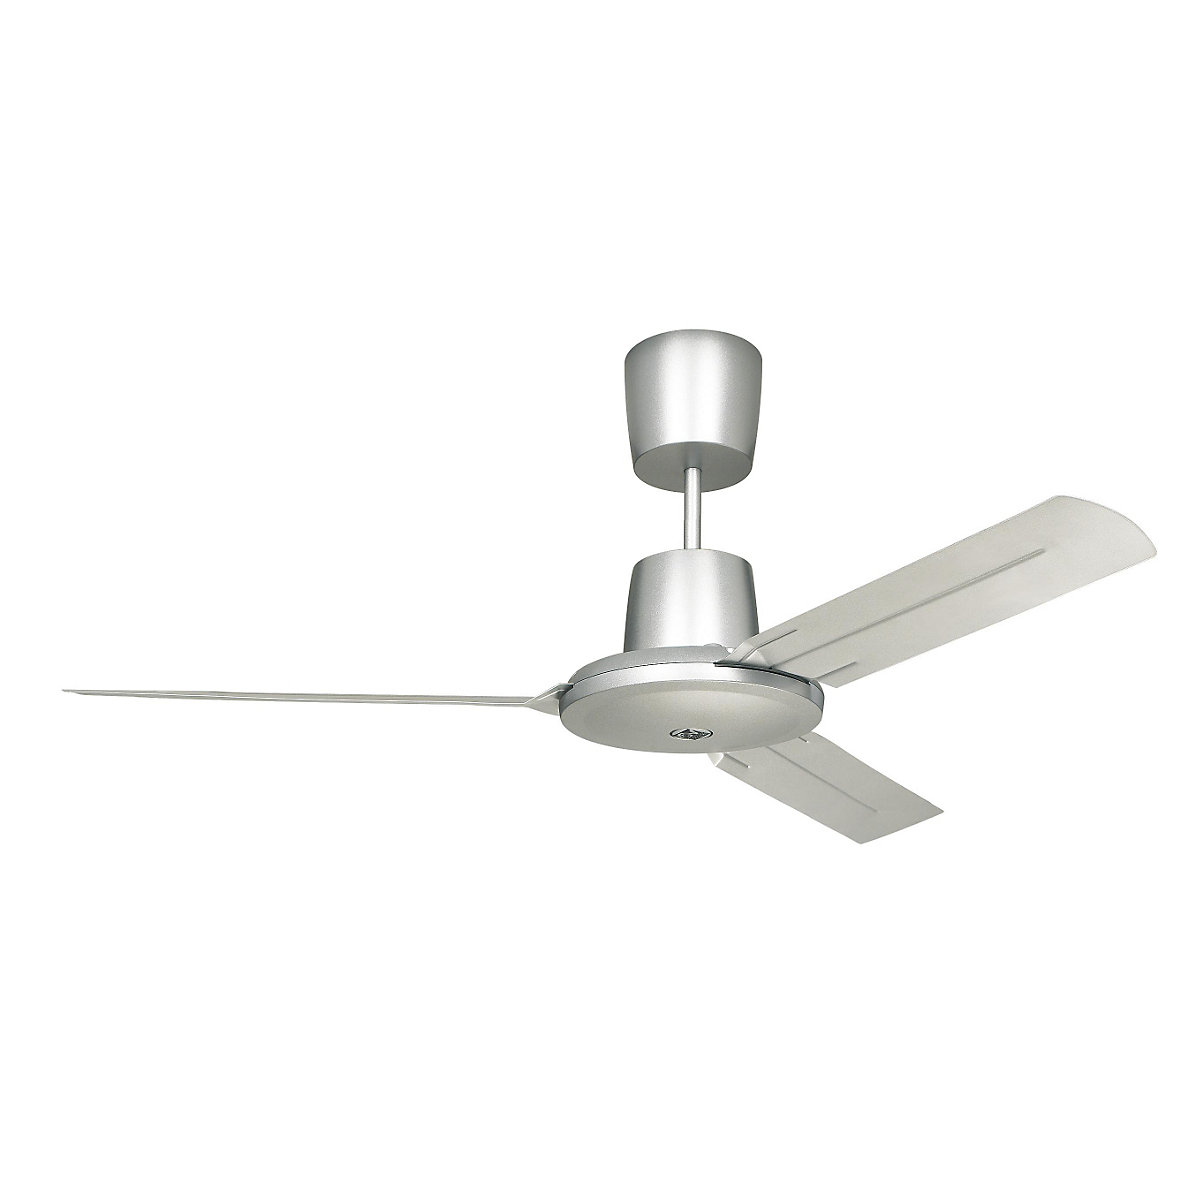 EVOLUTION ceiling fan, rotor blade Ø 1420 mm, painted silver-1